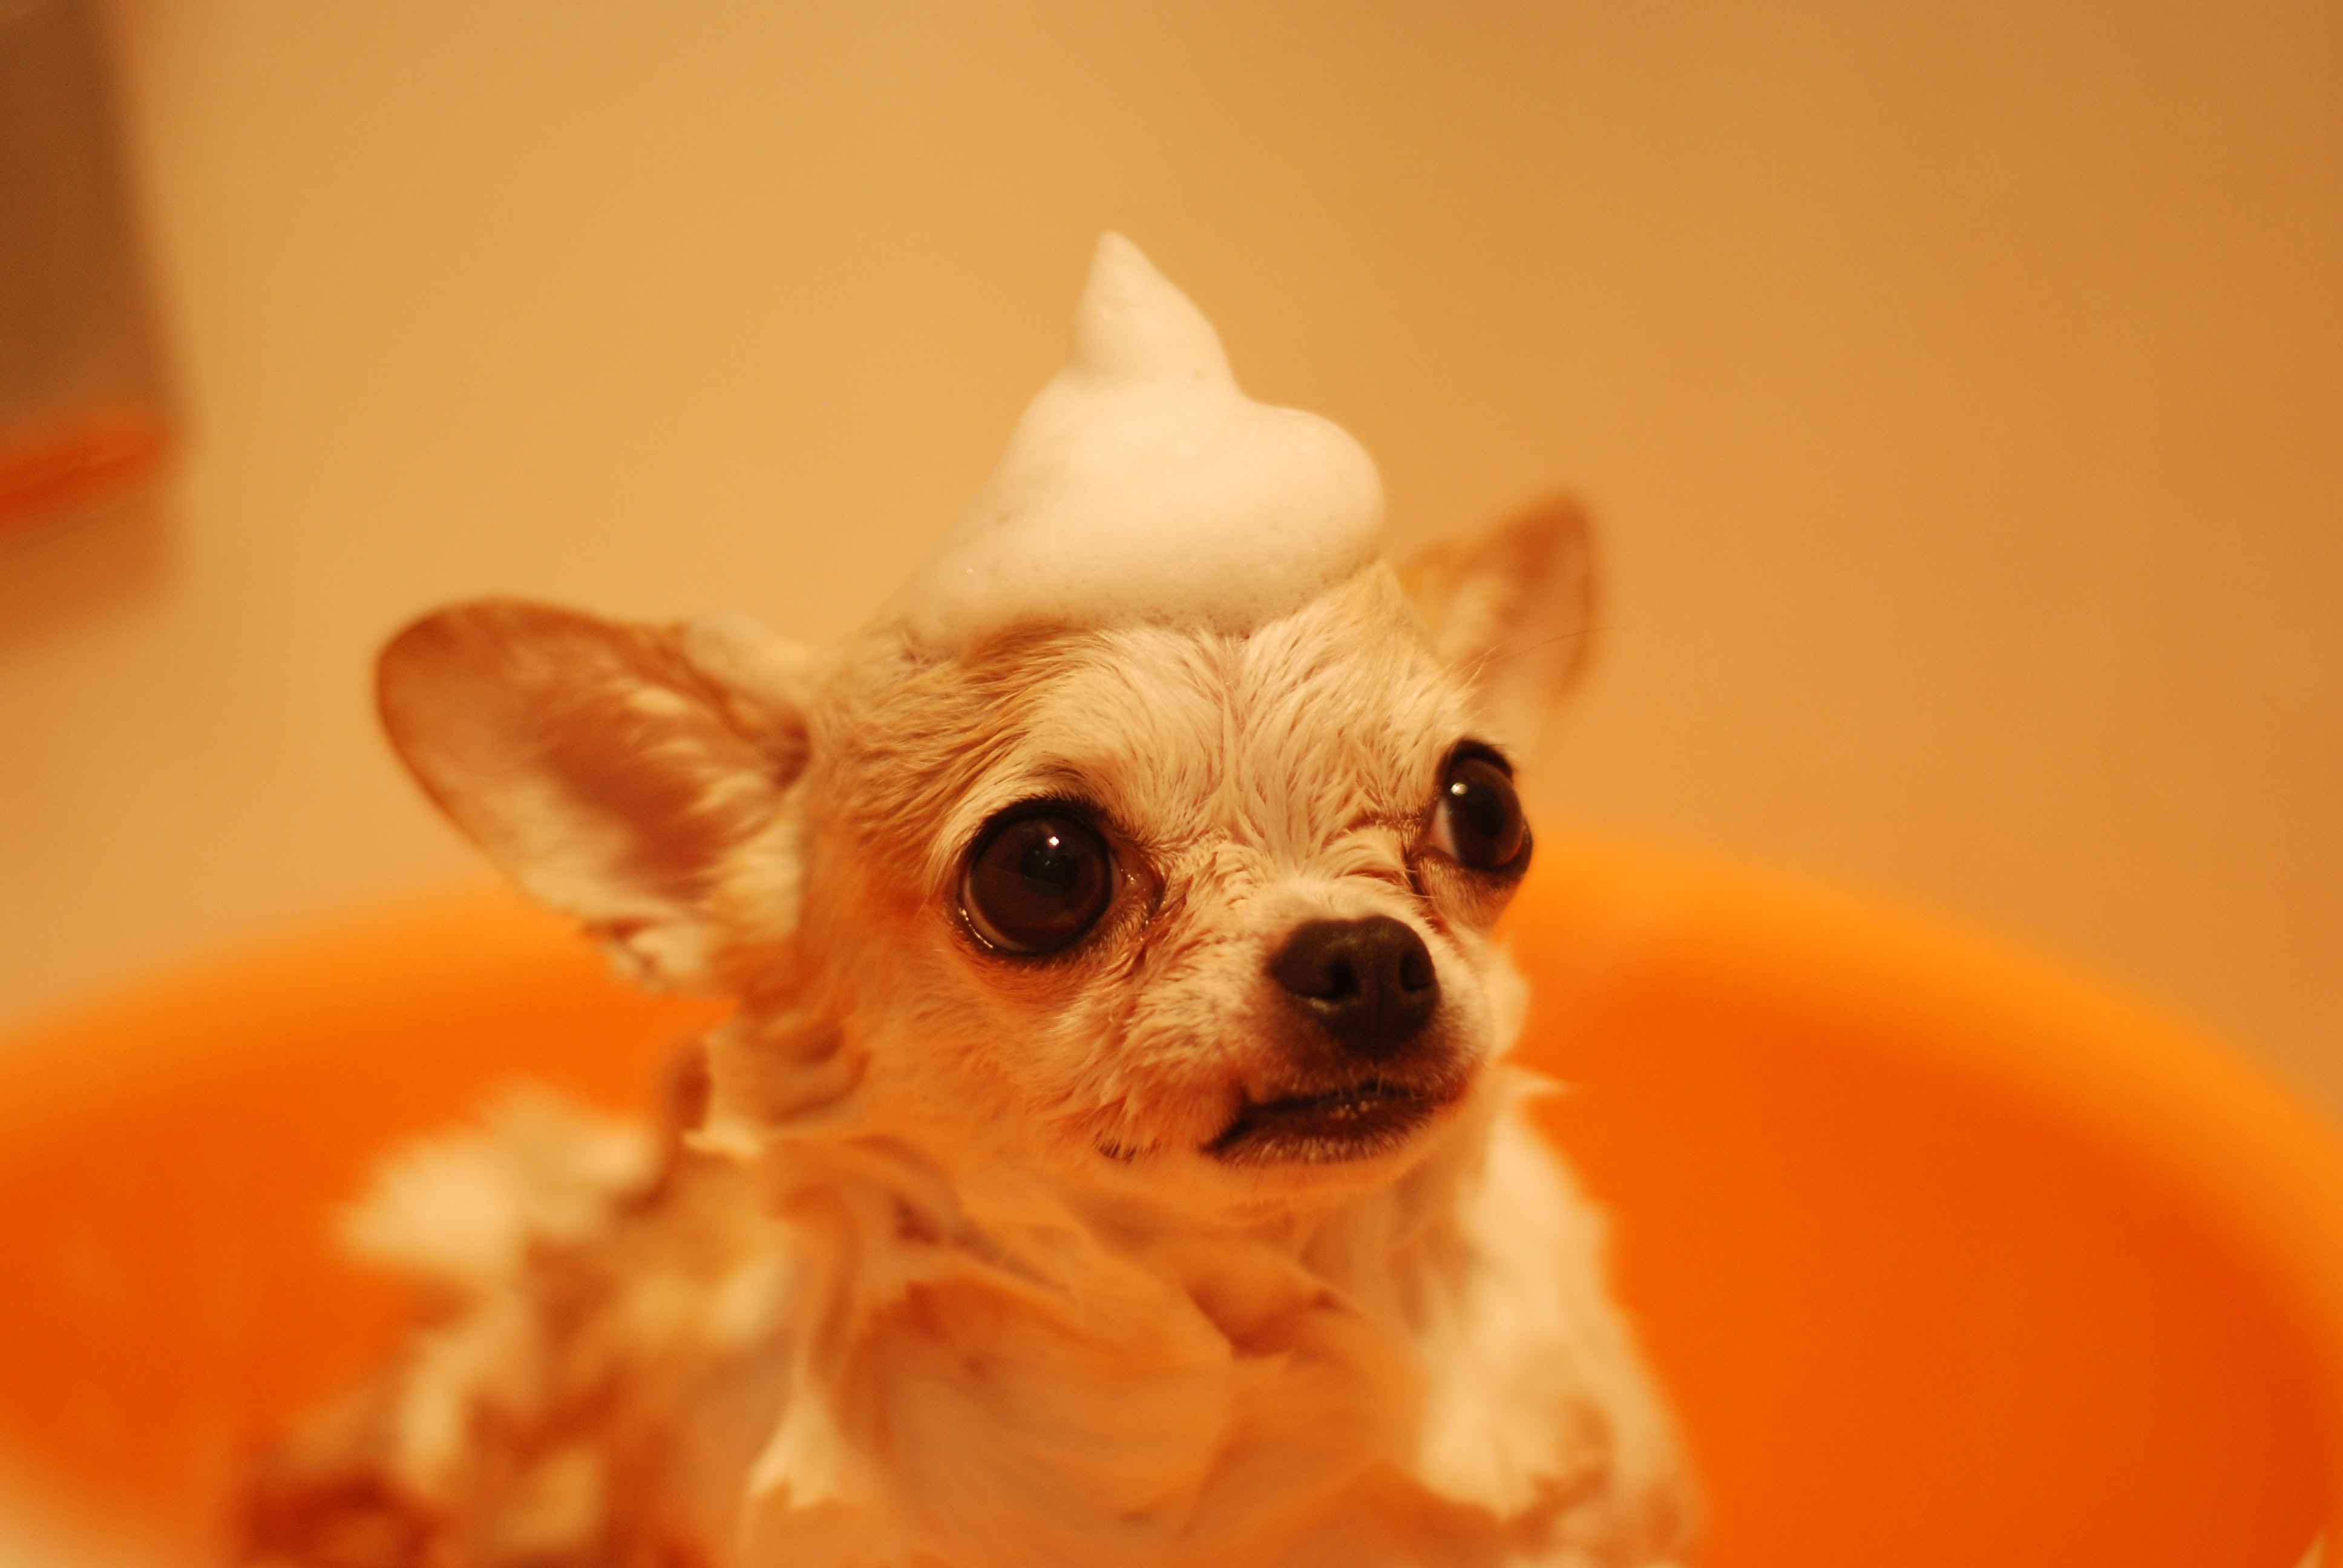 How important is consistency when dealing with a Chihuahua's anger issues?